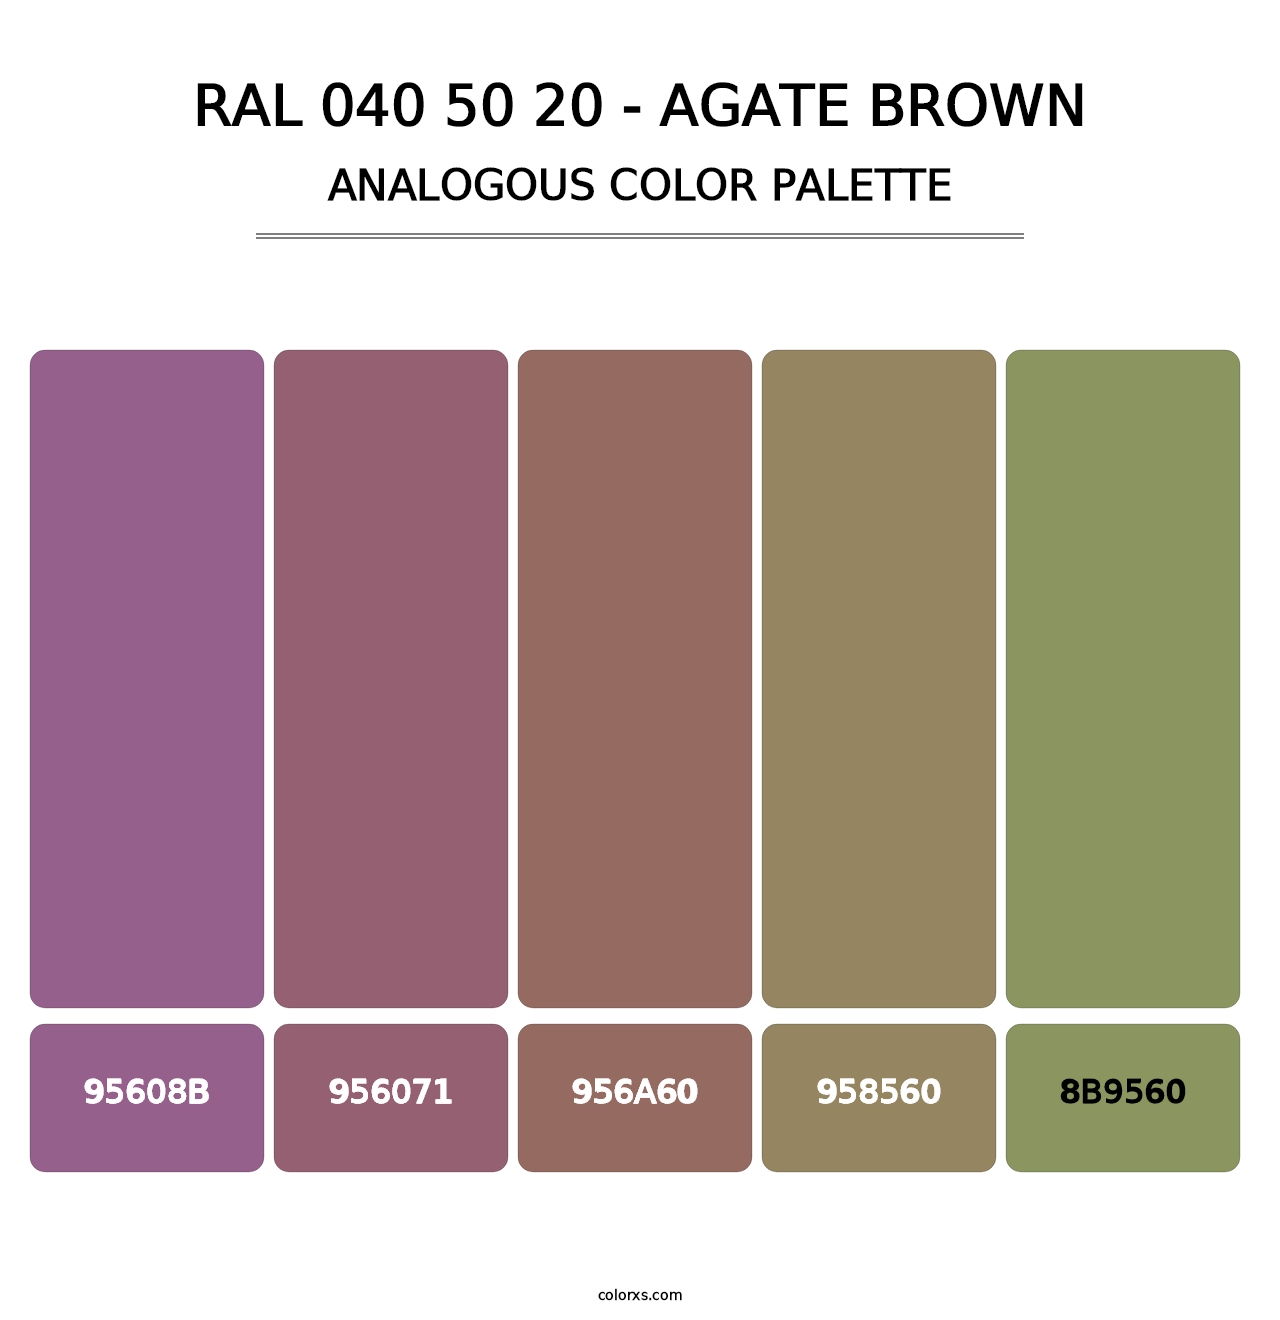 RAL 040 50 20 - Agate Brown - Analogous Color Palette